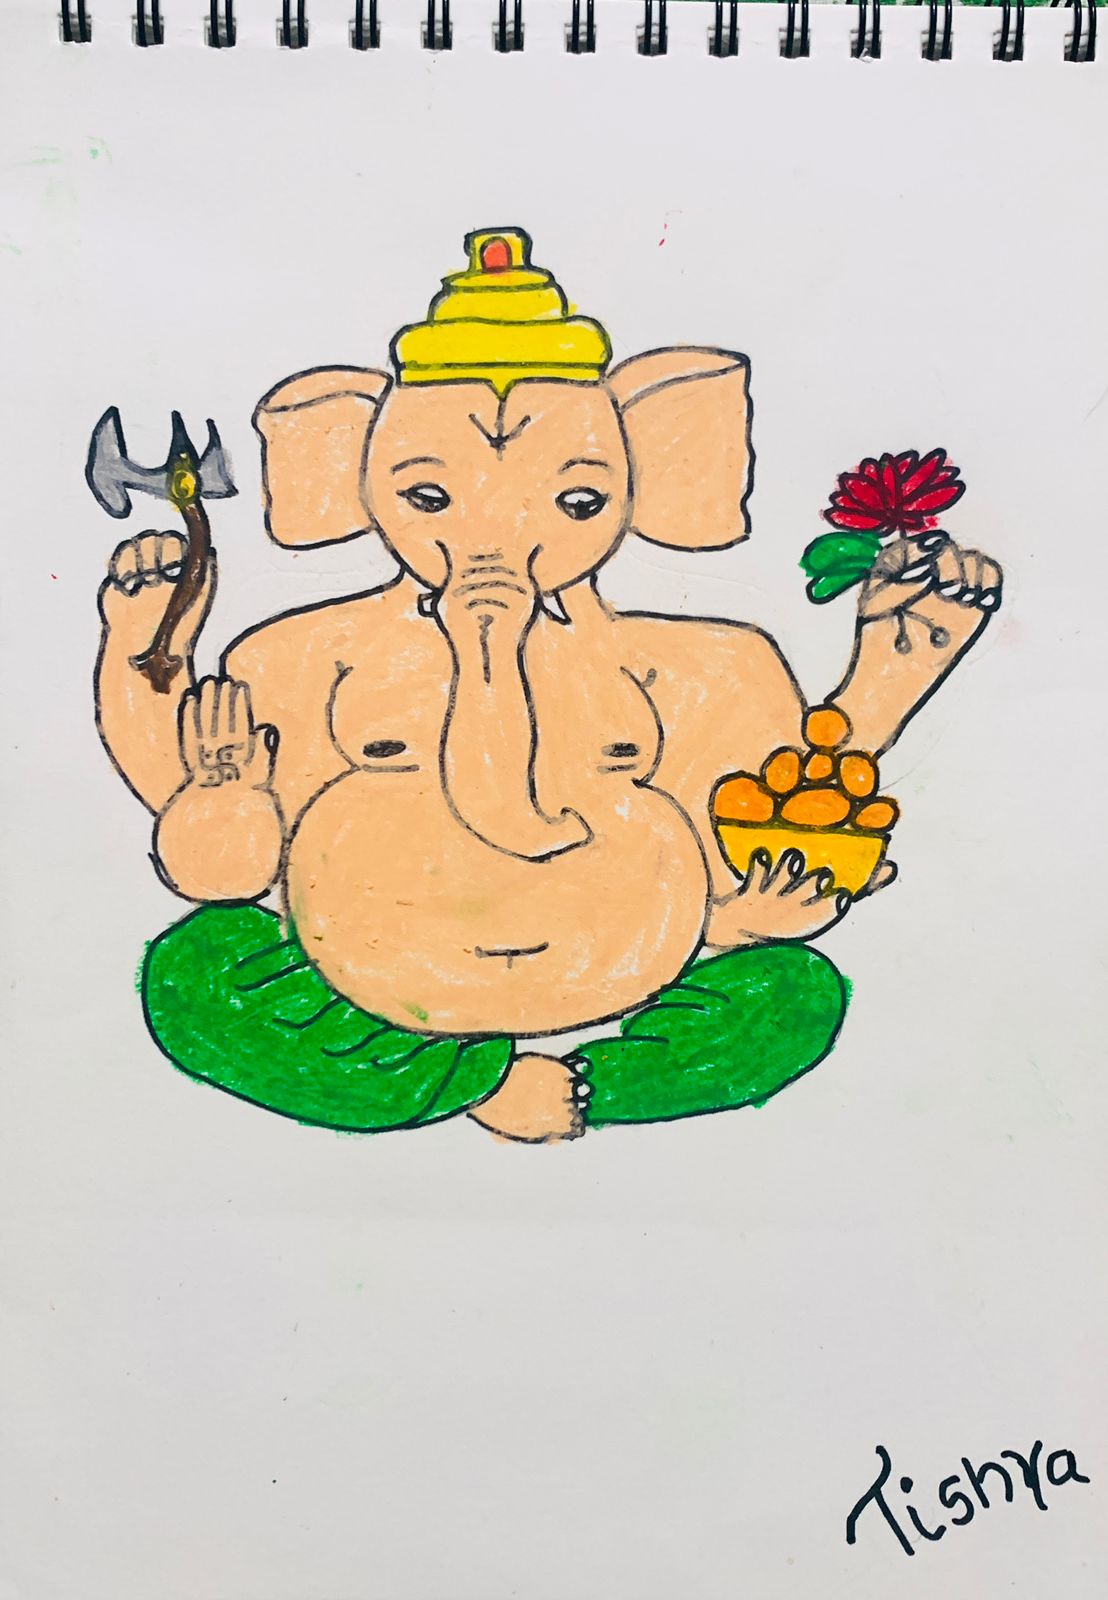 1400 Ganesha Drawing Stock Photos Pictures  RoyaltyFree Images  iStock